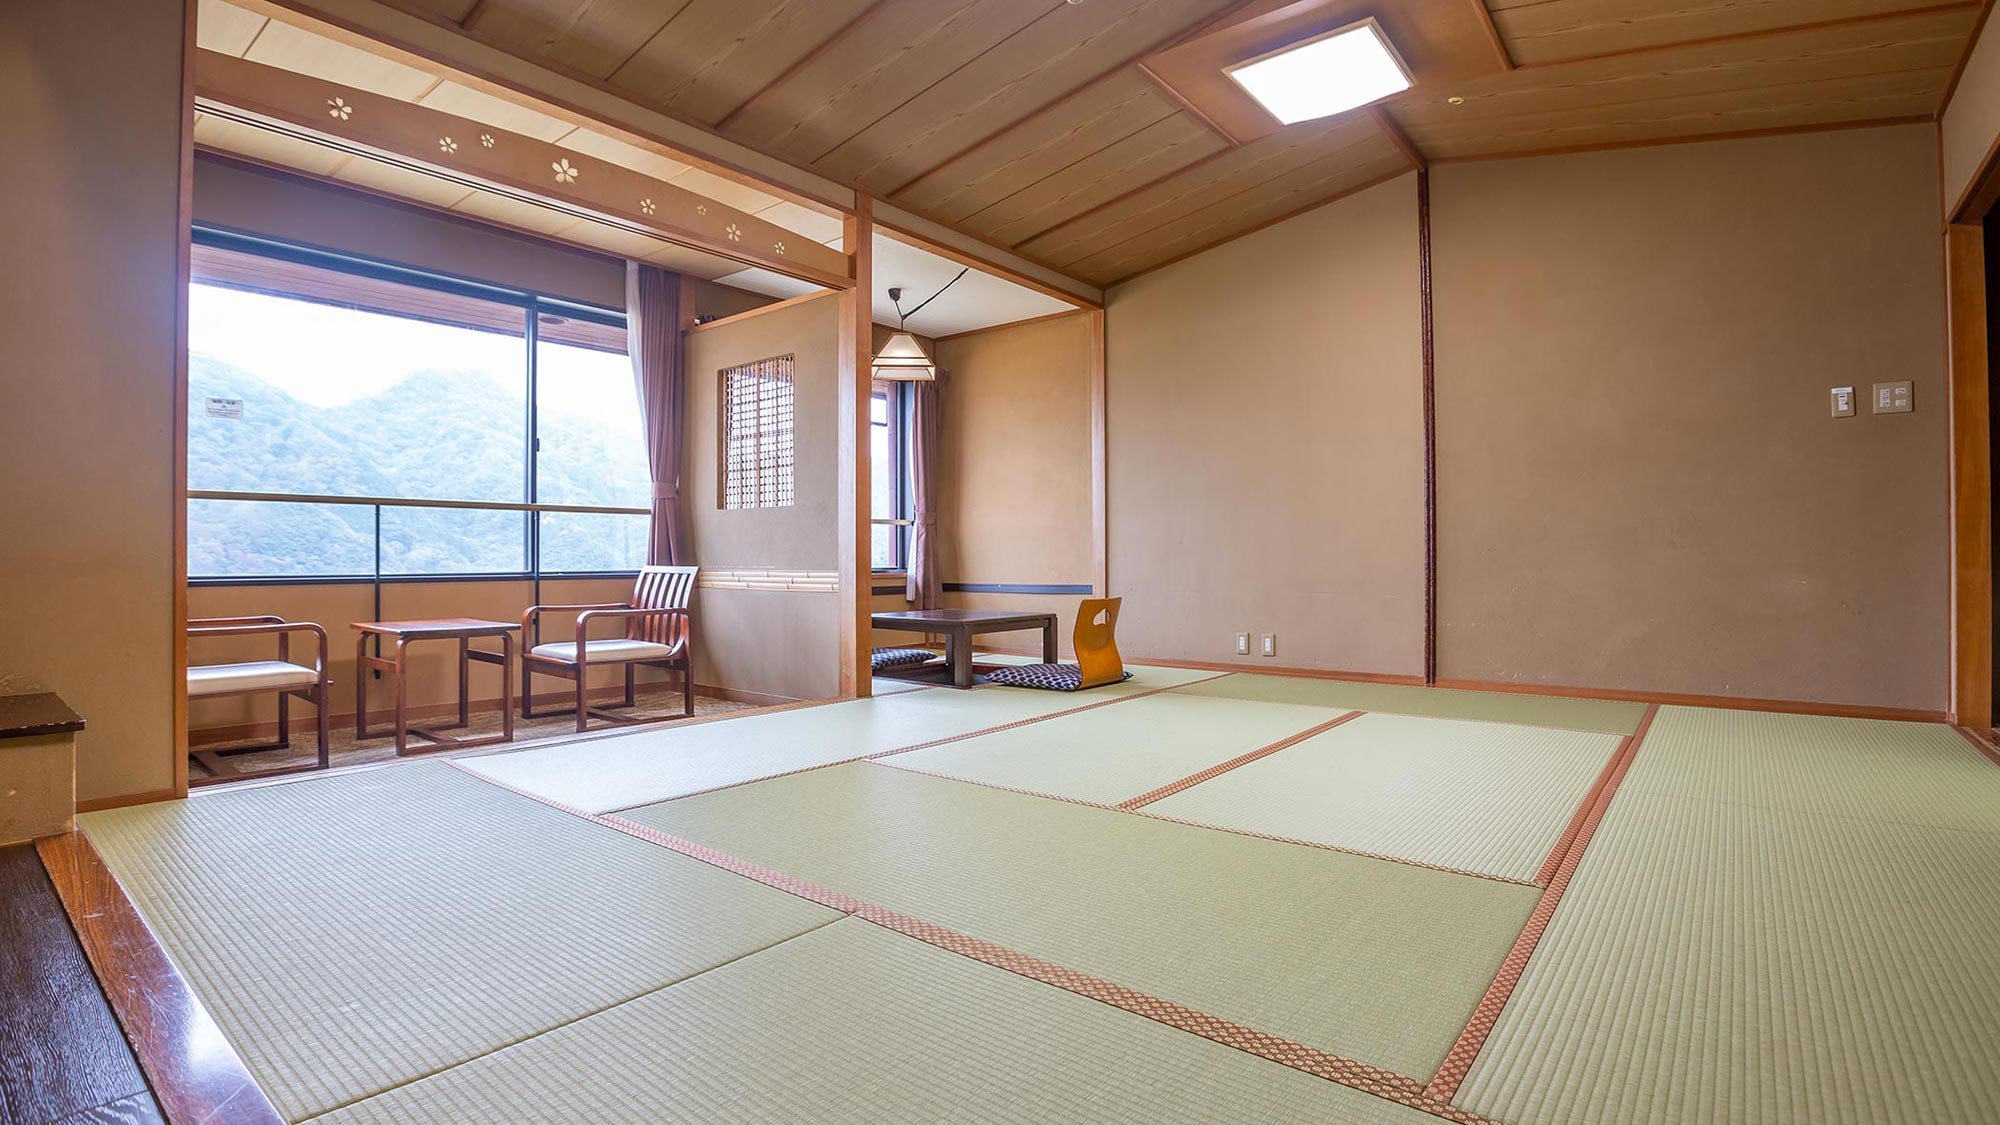 There are also Japanese-style rooms where you can stretch your legs and relax, Western-style rooms that are easy to use, and maisonette types.